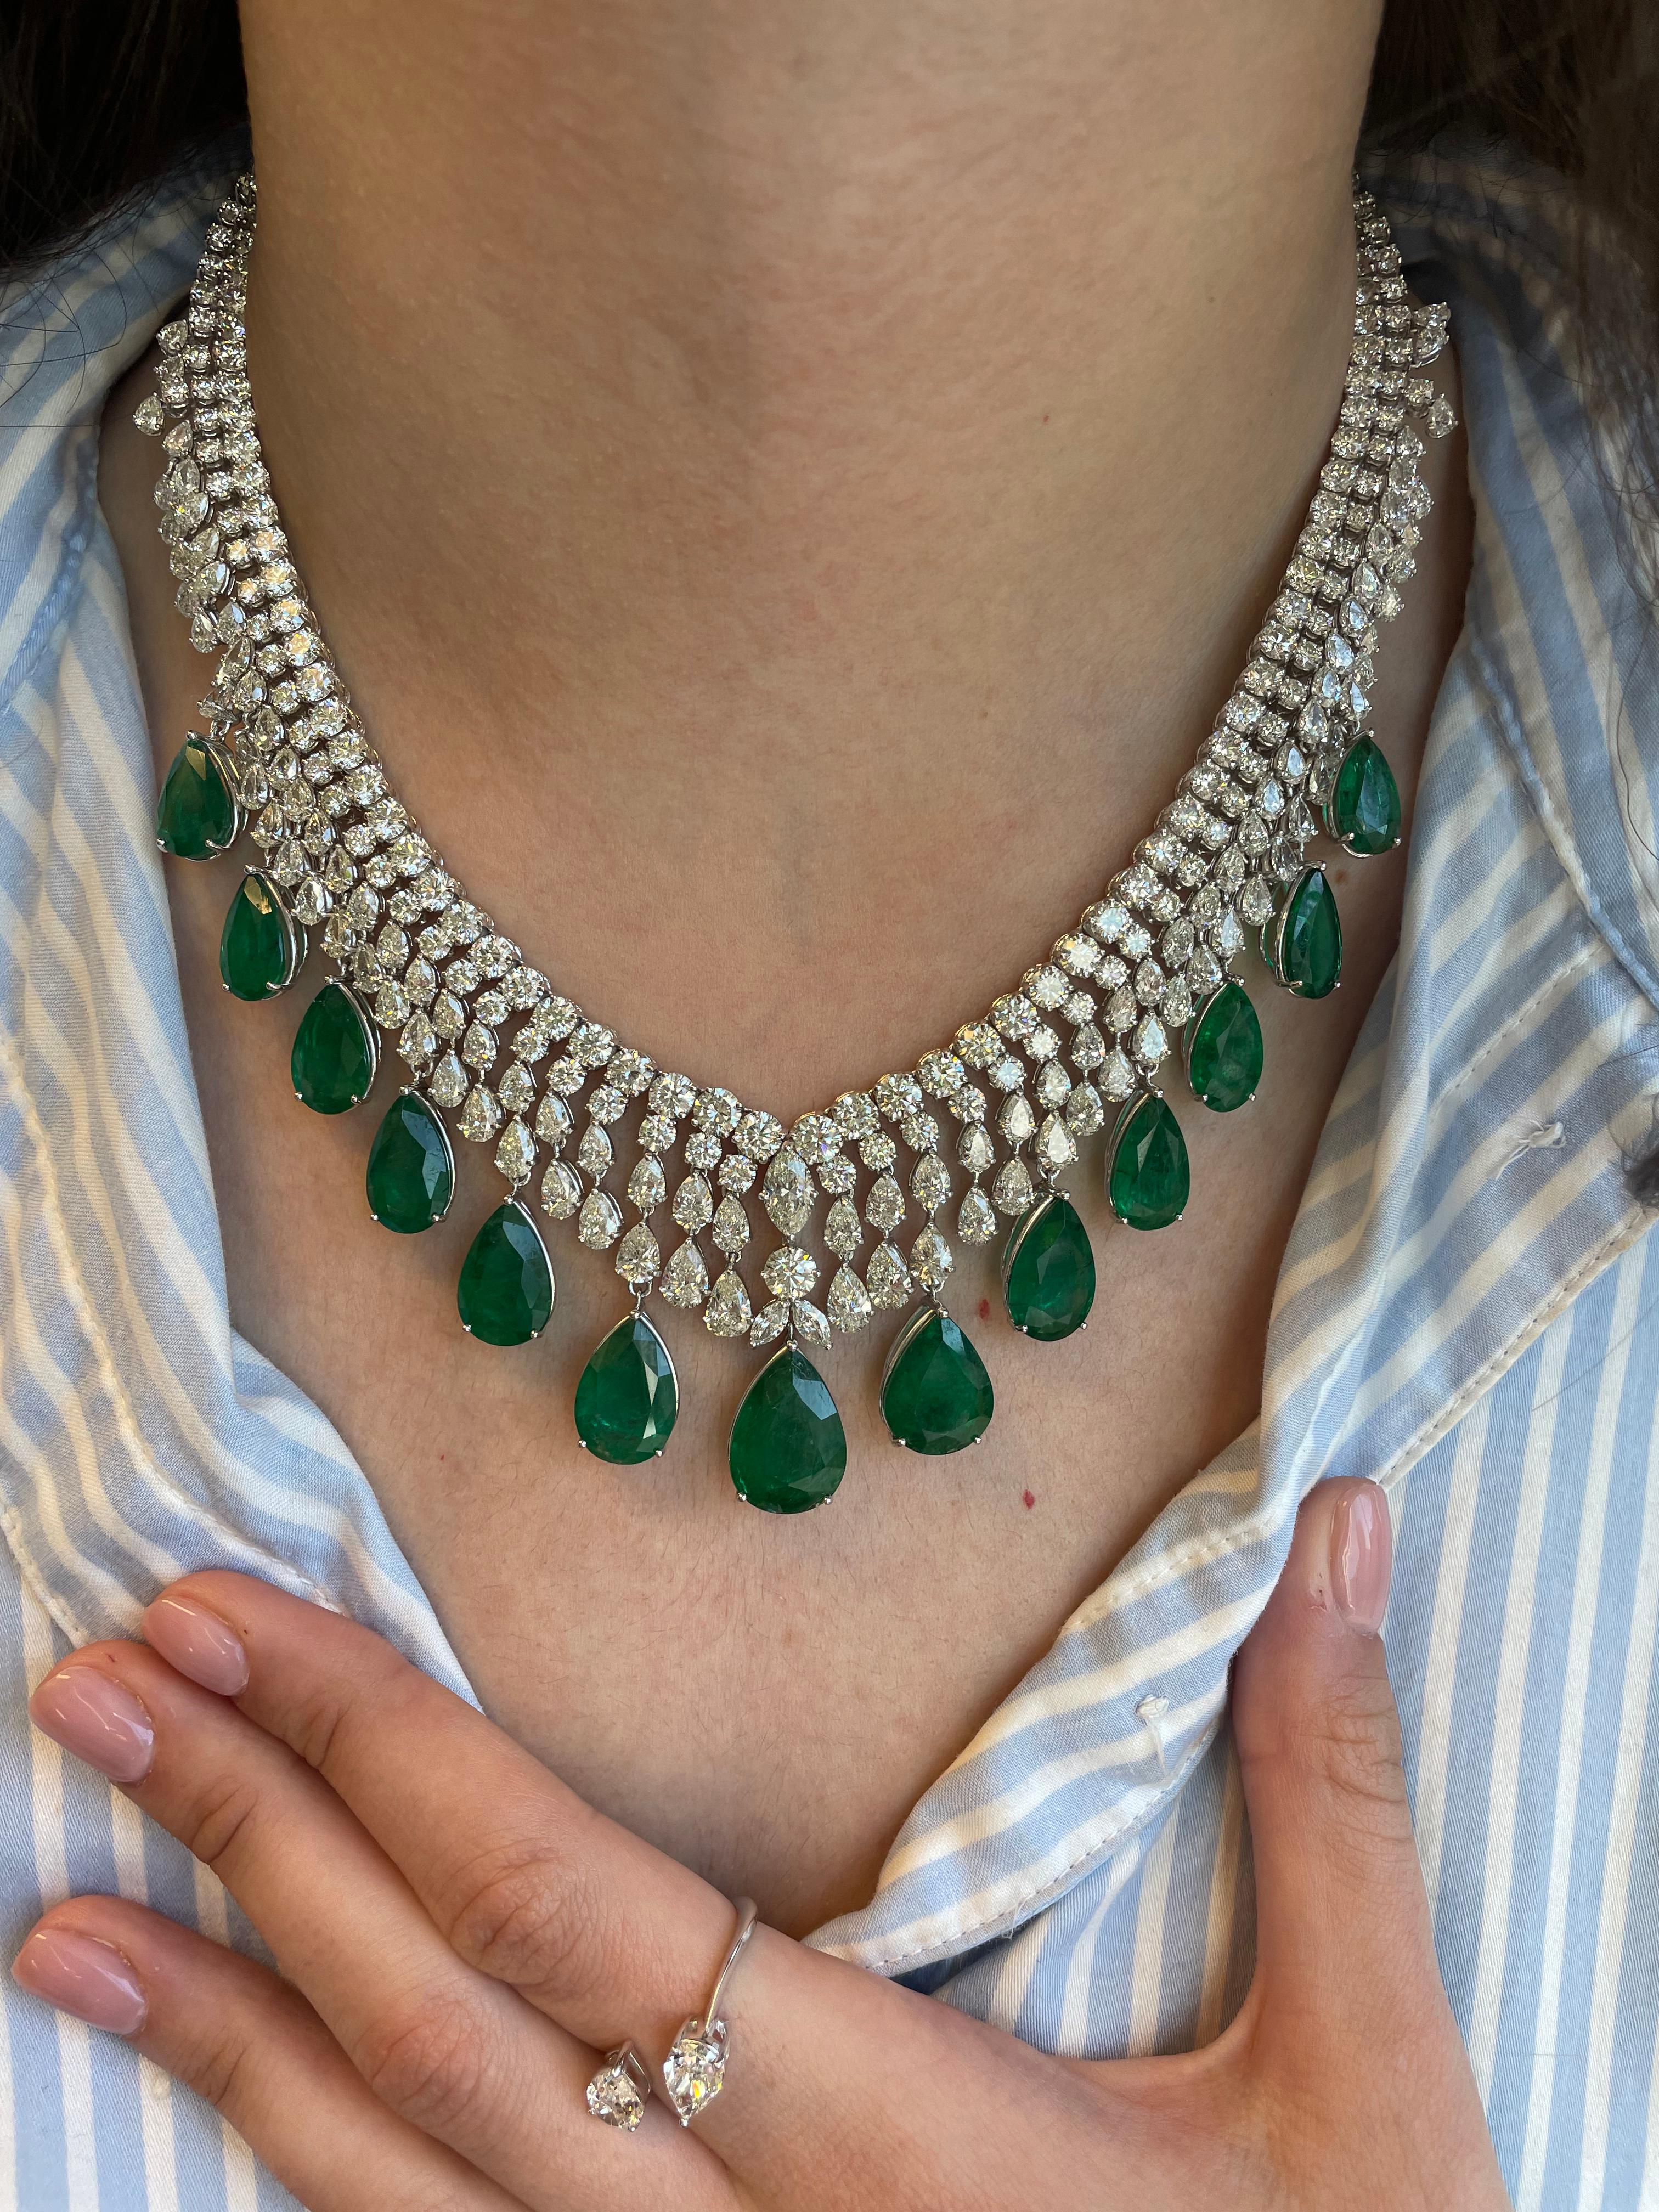 Important grand 108.94ct emerald and diamond necklace. High jewelry necklace, typically created by the major jewelry houses or seen at auction.
13 pear shaped emeralds, 49.14 carats, apx F2. 128 round brilliant diamonds, approximately I/J color and